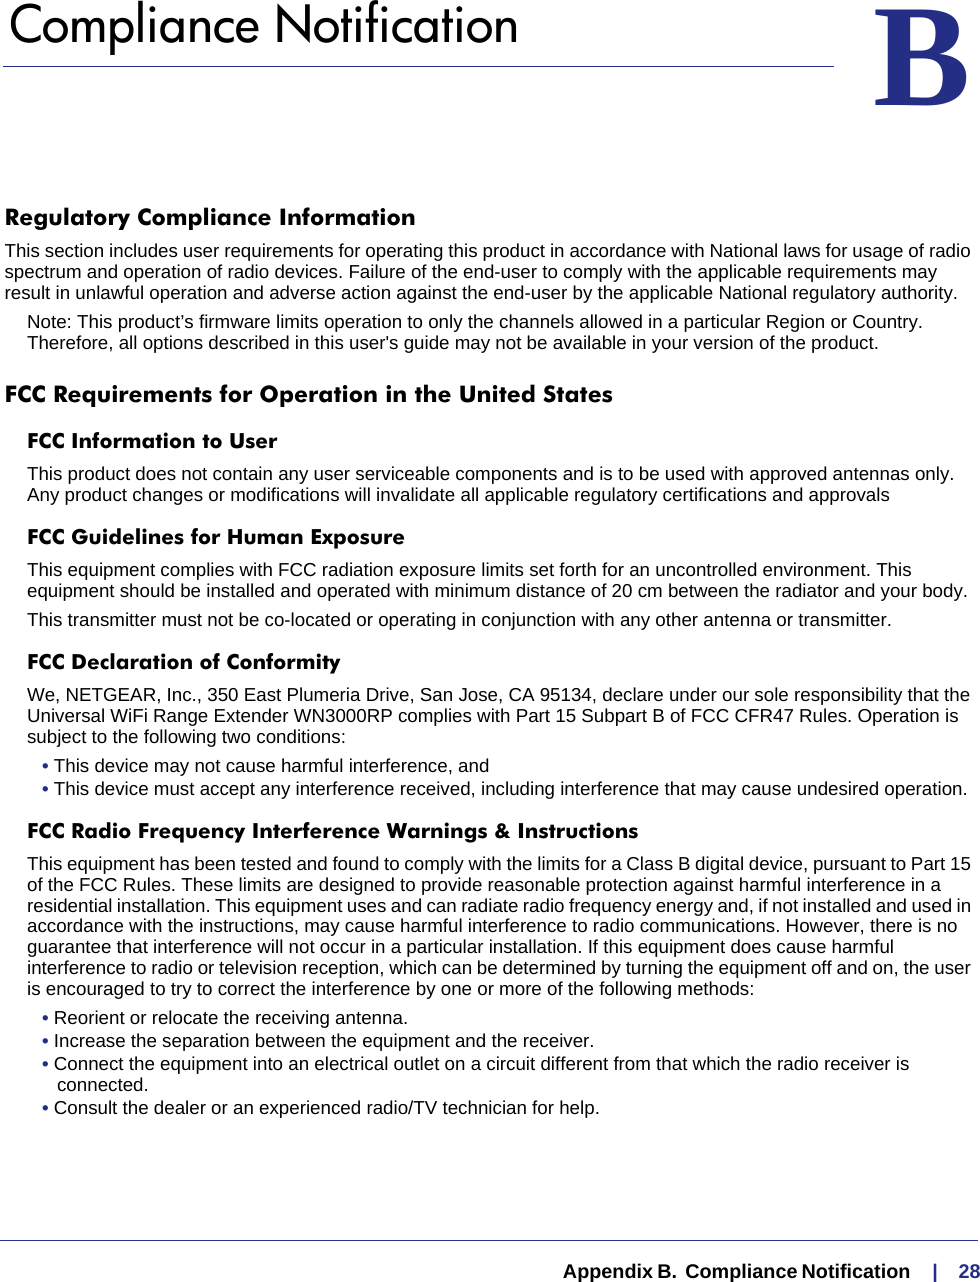   Appendix B.  Compliance Notification     |    28BB.   Compliance NotificationRegulatory Compliance InformationThis section includes user requirements for operating this product in accordance with National laws for usage of radio spectrum and operation of radio devices. Failure of the end-user to comply with the applicable requirements may result in unlawful operation and adverse action against the end-user by the applicable National regulatory authority.Note: This product’s firmware limits operation to only the channels allowed in a particular Region or Country.  Therefore, all options described in this user&apos;s guide may not be available in your version of the product.FCC Requirements for Operation in the United States FCC Information to UserThis product does not contain any user serviceable components and is to be used with approved antennas only. Any product changes or modifications will invalidate all applicable regulatory certifications and approvalsFCC Guidelines for Human ExposureThis equipment complies with FCC radiation exposure limits set forth for an uncontrolled environment. This equipment should be installed and operated with minimum distance of 20 cm between the radiator and your body. This transmitter must not be co-located or operating in conjunction with any other antenna or transmitter. FCC Declaration of ConformityWe, NETGEAR, Inc., 350 East Plumeria Drive, San Jose, CA 95134, declare under our sole responsibility that the Universal WiFi Range Extender WN3000RP complies with Part 15 Subpart B of FCC CFR47 Rules. Operation is subject to the following two conditions:• This device may not cause harmful interference, and• This device must accept any interference received, including interference that may cause undesired operation.FCC Radio Frequency Interference Warnings &amp; InstructionsThis equipment has been tested and found to comply with the limits for a Class B digital device, pursuant to Part 15 of the FCC Rules. These limits are designed to provide reasonable protection against harmful interference in a residential installation. This equipment uses and can radiate radio frequency energy and, if not installed and used in accordance with the instructions, may cause harmful interference to radio communications. However, there is no guarantee that interference will not occur in a particular installation. If this equipment does cause harmful interference to radio or television reception, which can be determined by turning the equipment off and on, the user is encouraged to try to correct the interference by one or more of the following methods:• Reorient or relocate the receiving antenna.• Increase the separation between the equipment and the receiver.• Connect the equipment into an electrical outlet on a circuit different from that which the radio receiver is connected.• Consult the dealer or an experienced radio/TV technician for help.